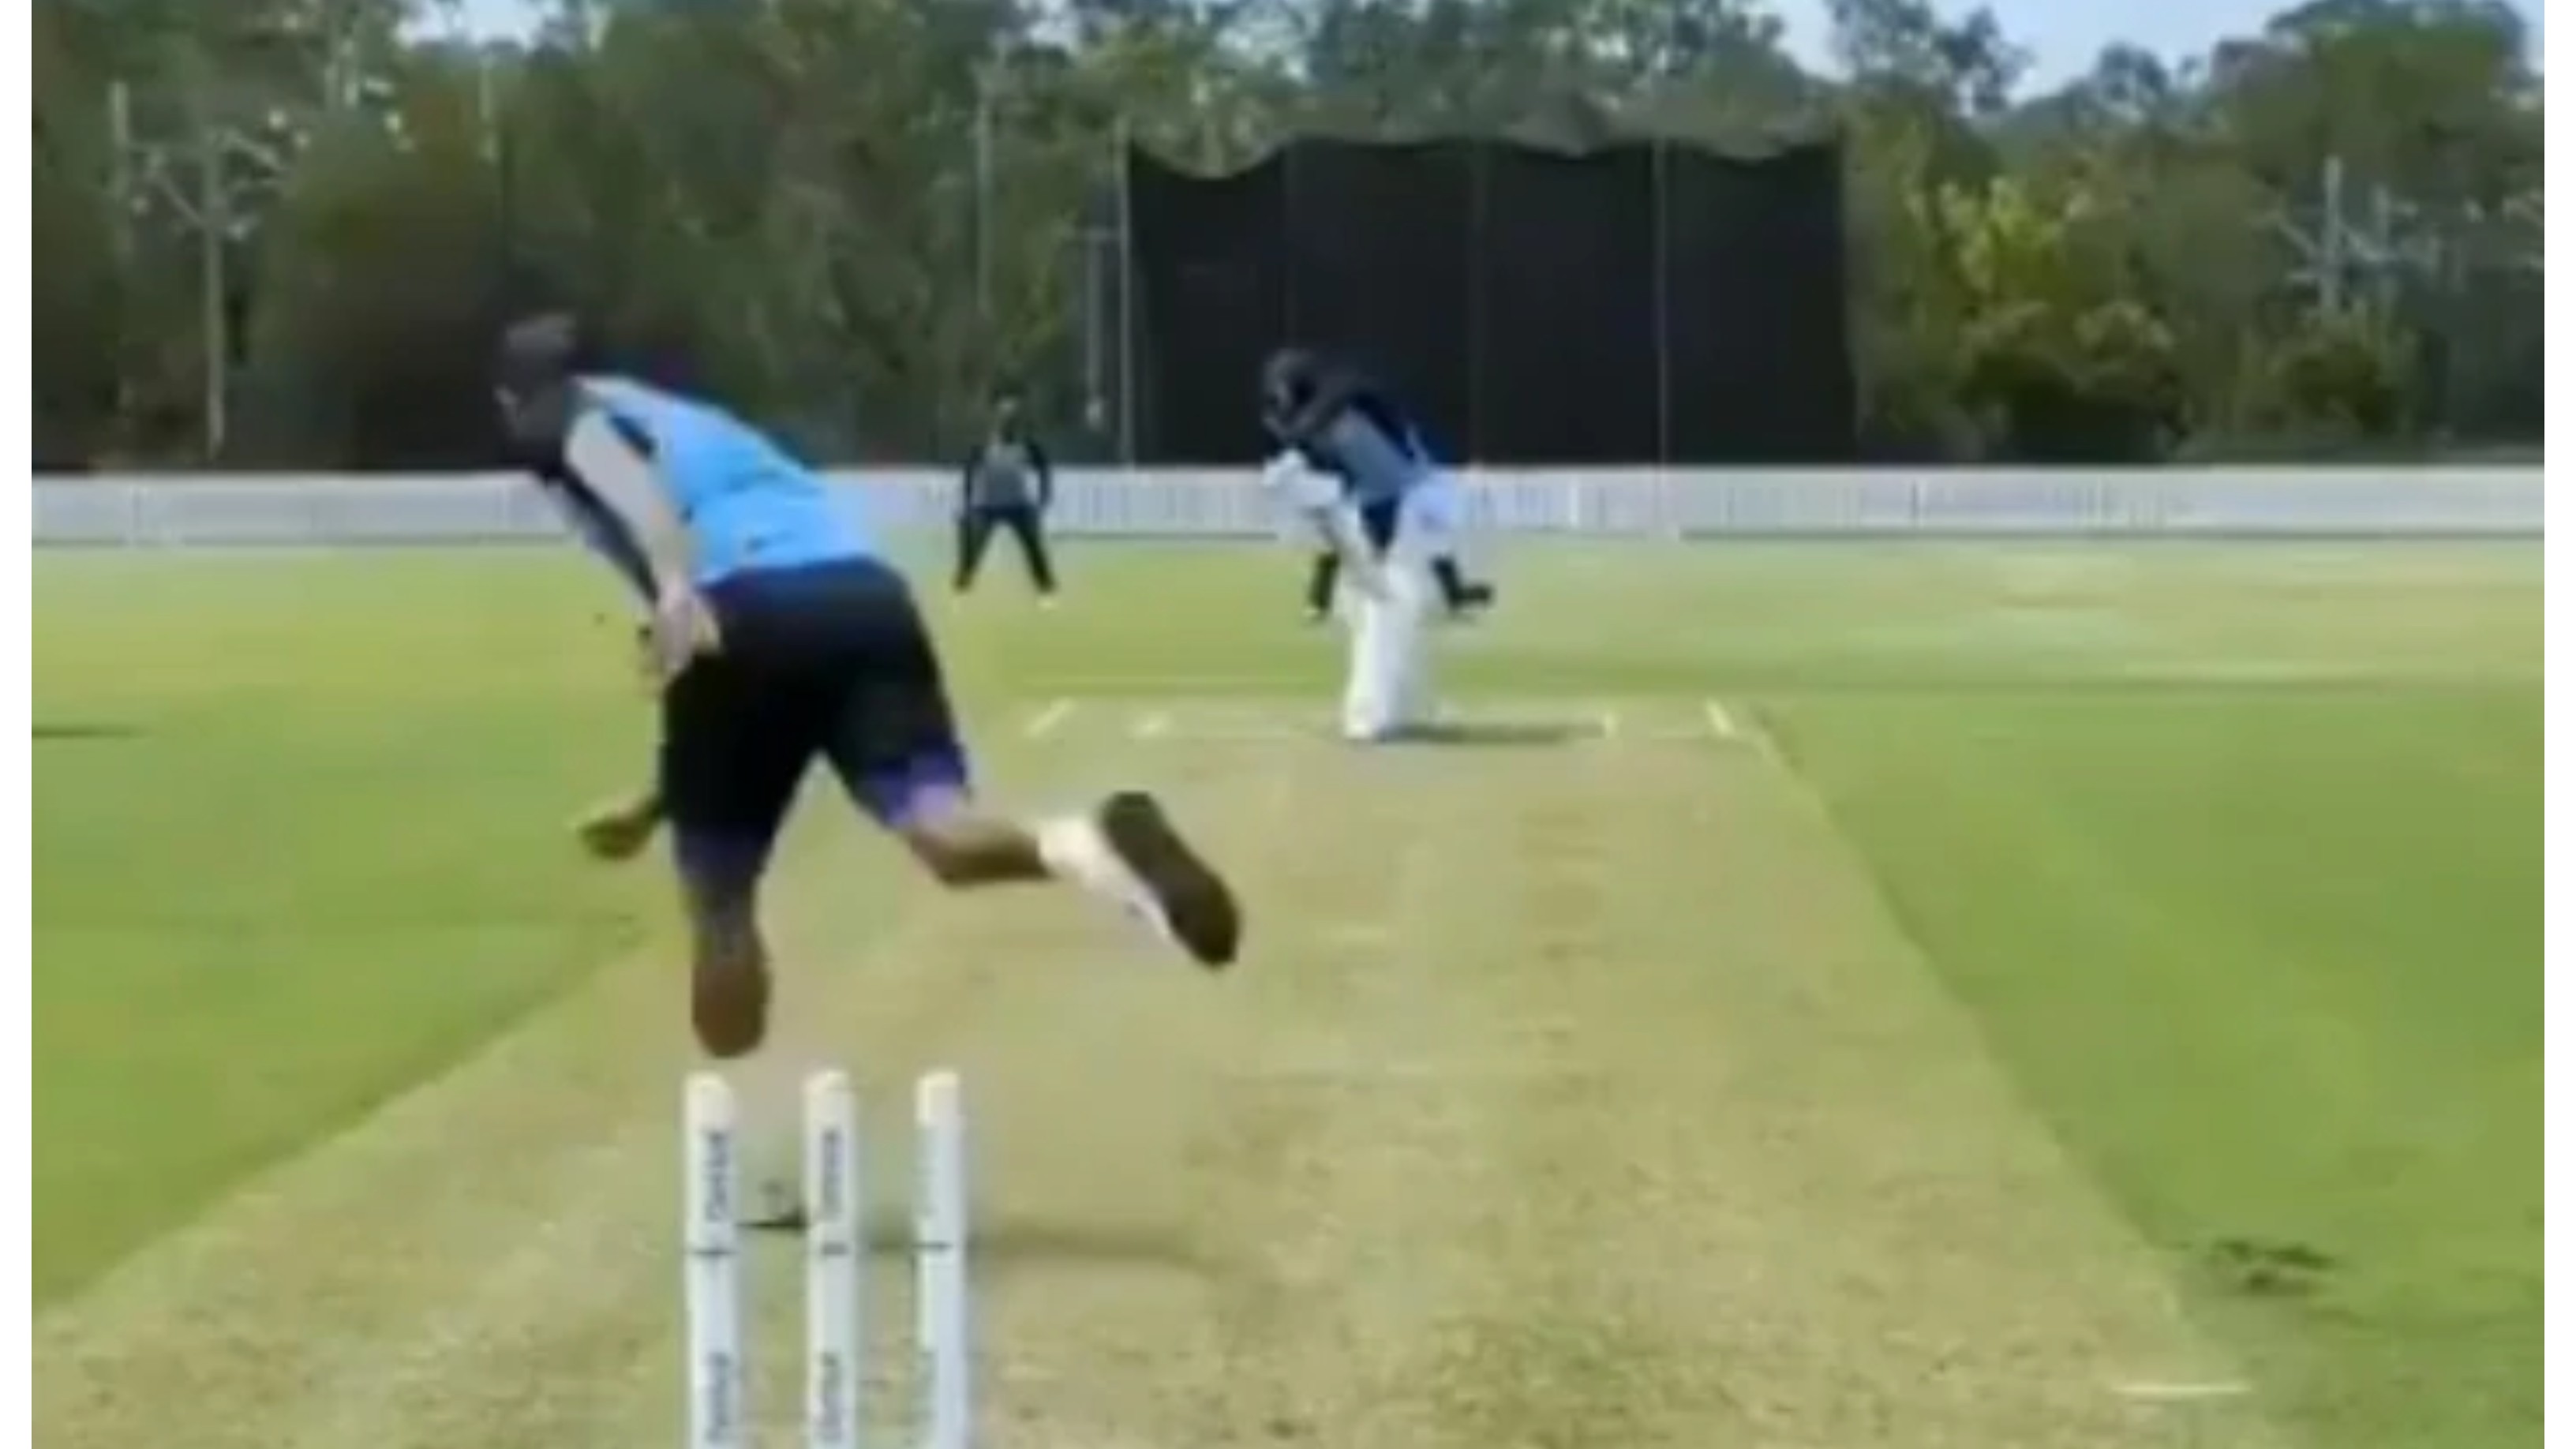 AUS v IND 2020-21: WATCH – Virat Kohli faces Indian bowling attack in the nets during an intense practice session